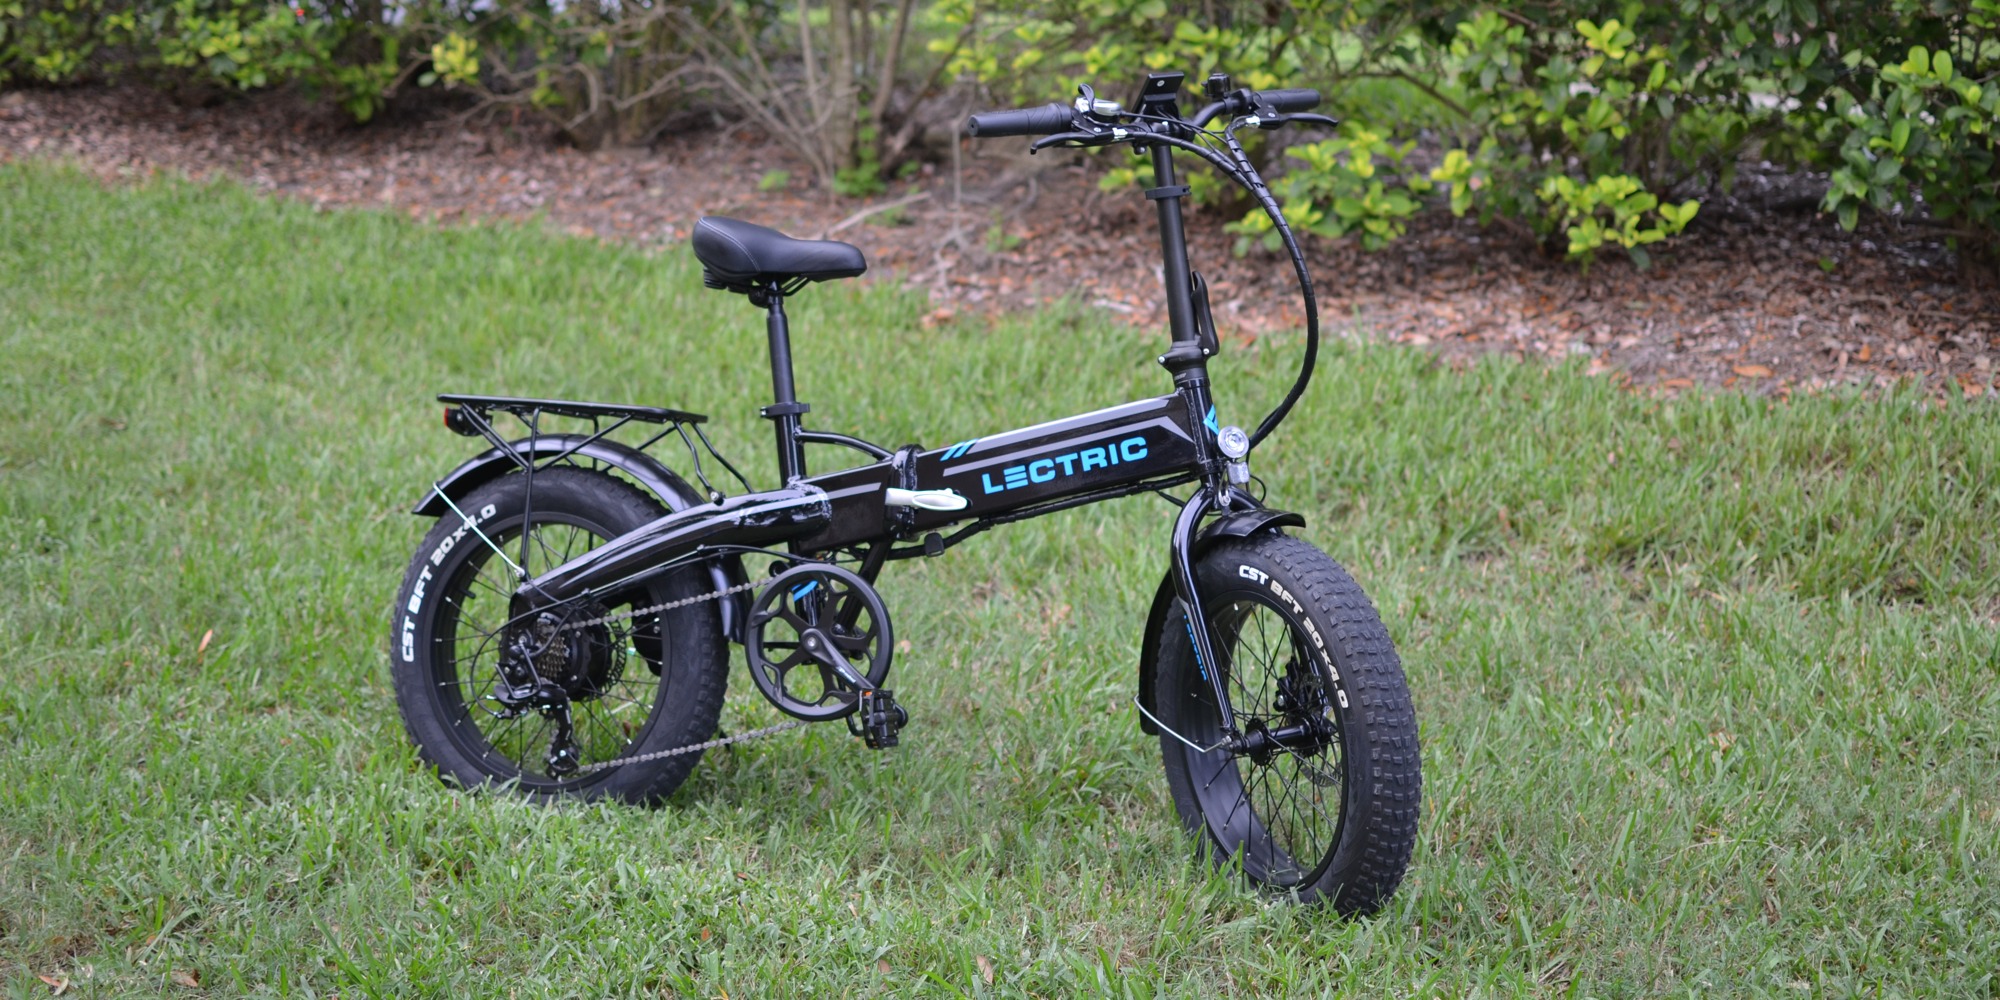 Lectric XP review: How can a $879 electric fat tire bike be this awesome?